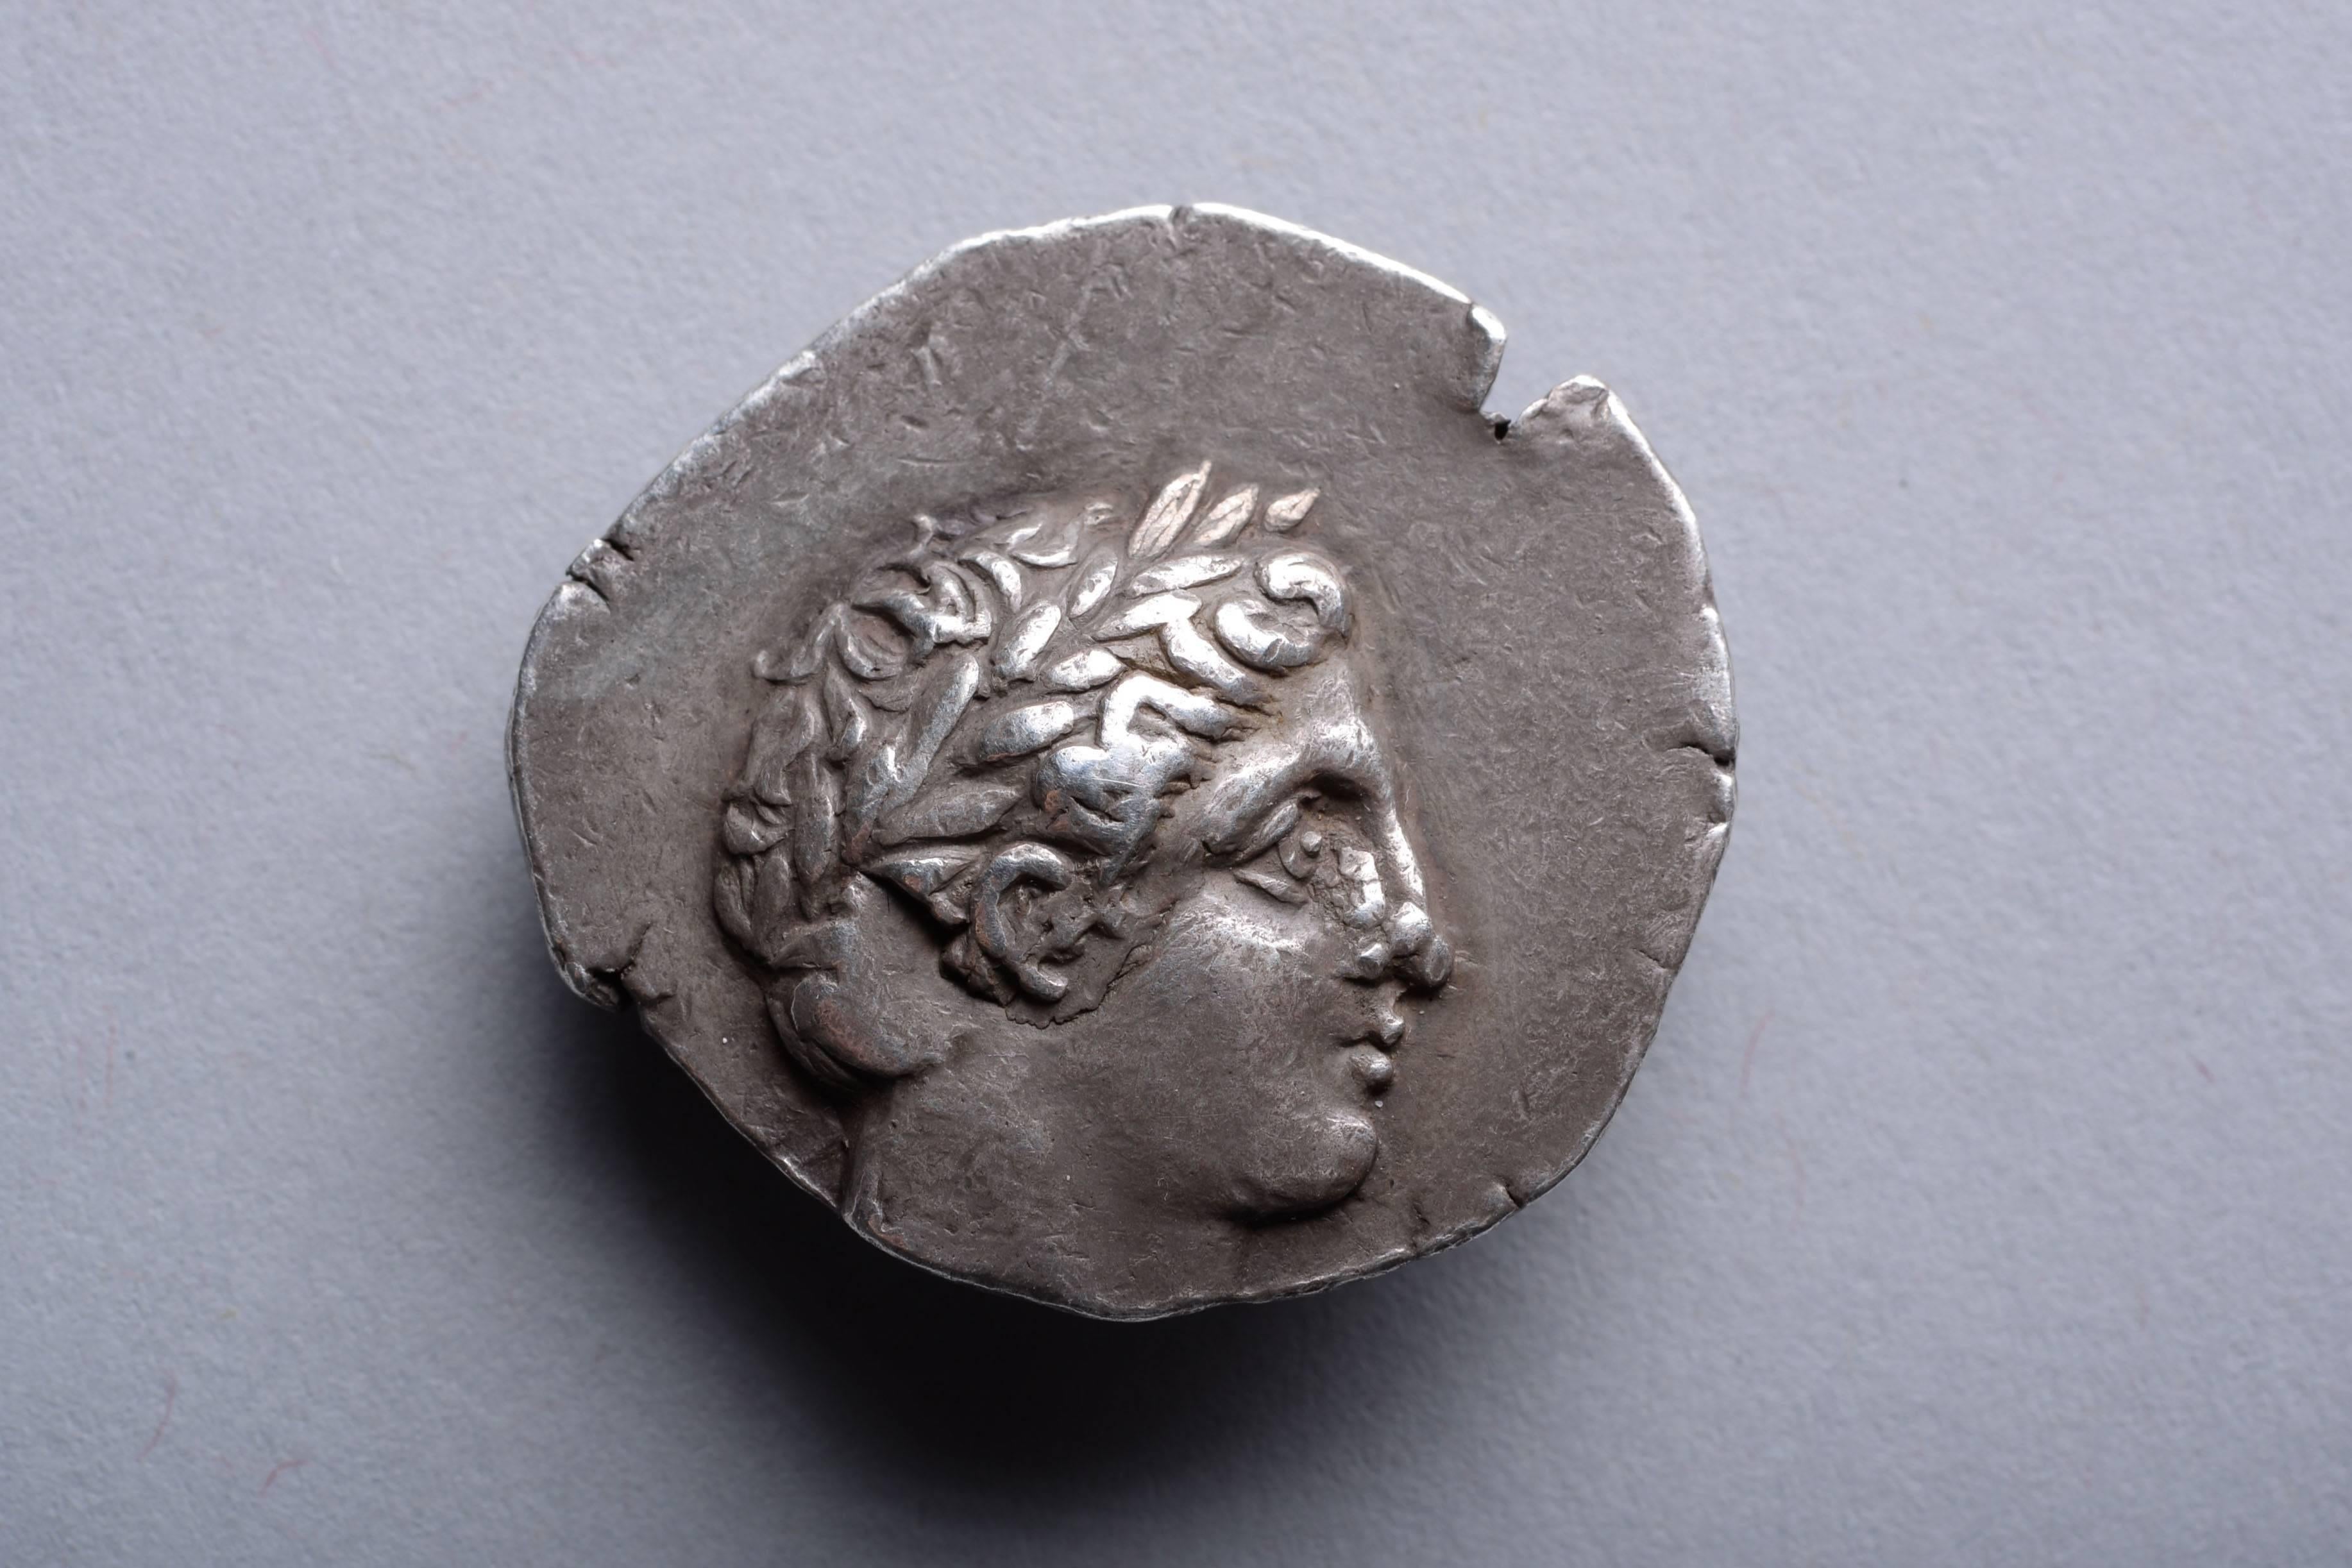 A silver tetradrachm minted under King Patraos of Paeonia, circa 335-315 BC.

The obverse with the head of a youthful Apollo, wearing a laurel wreath. 

The reverse with a Paeonian warrior on horseback, wearing full armour and elaborate helmet,